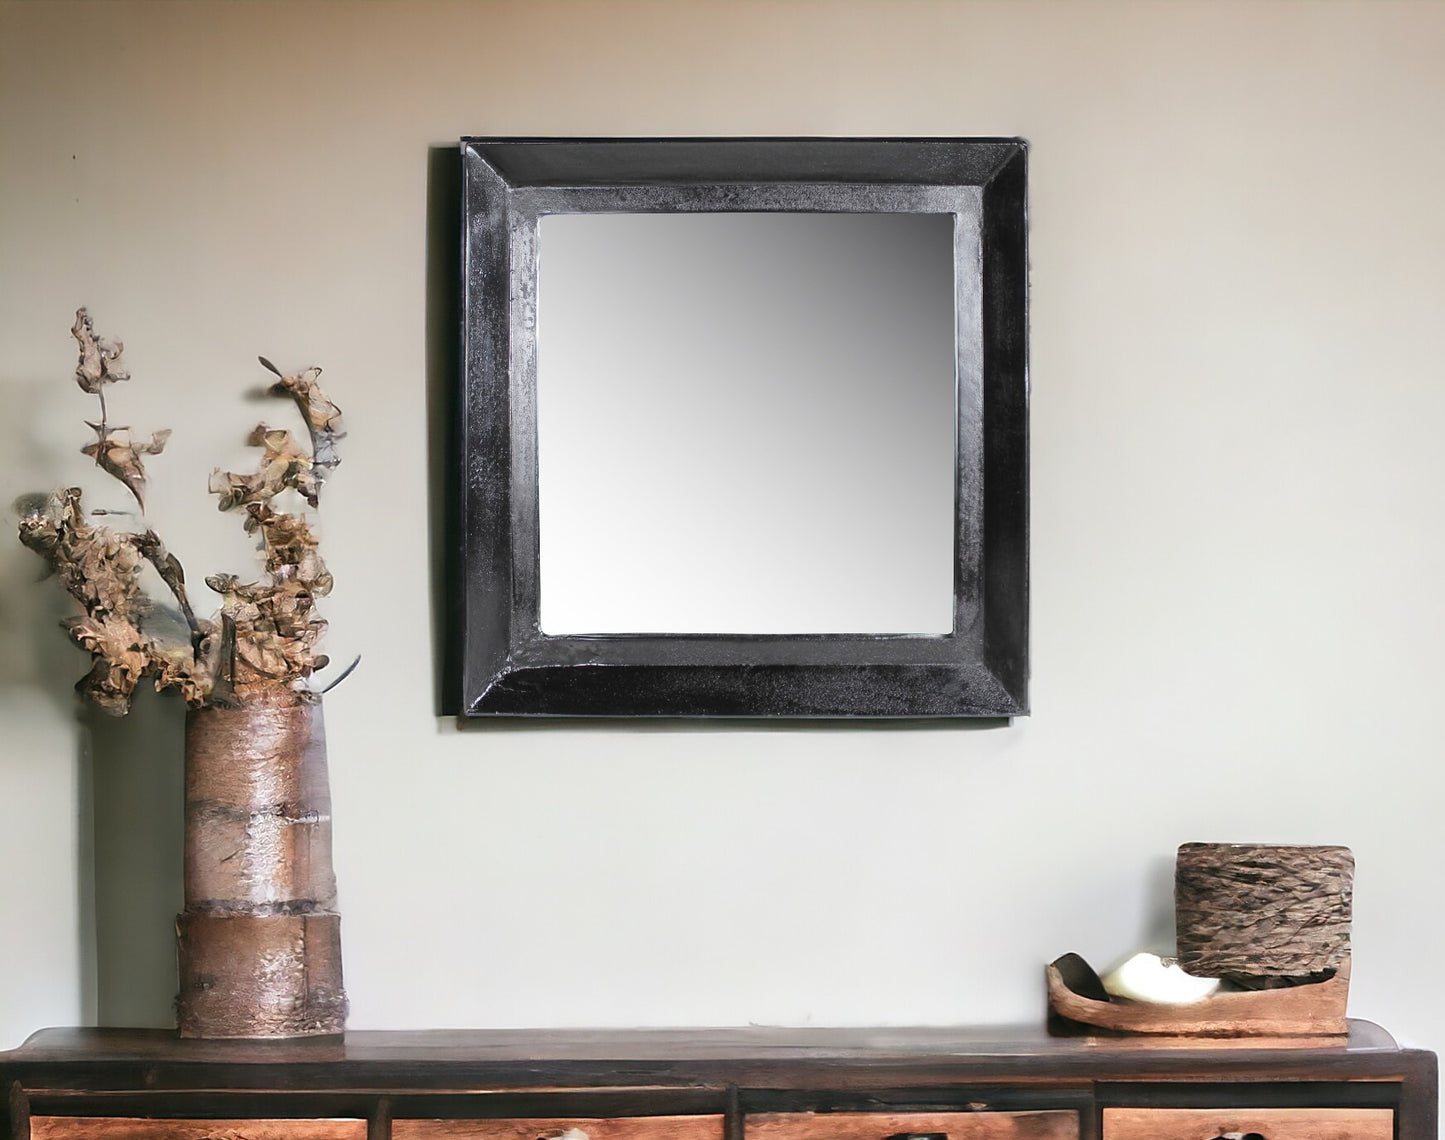 27" Silver Framed Accent Mirror